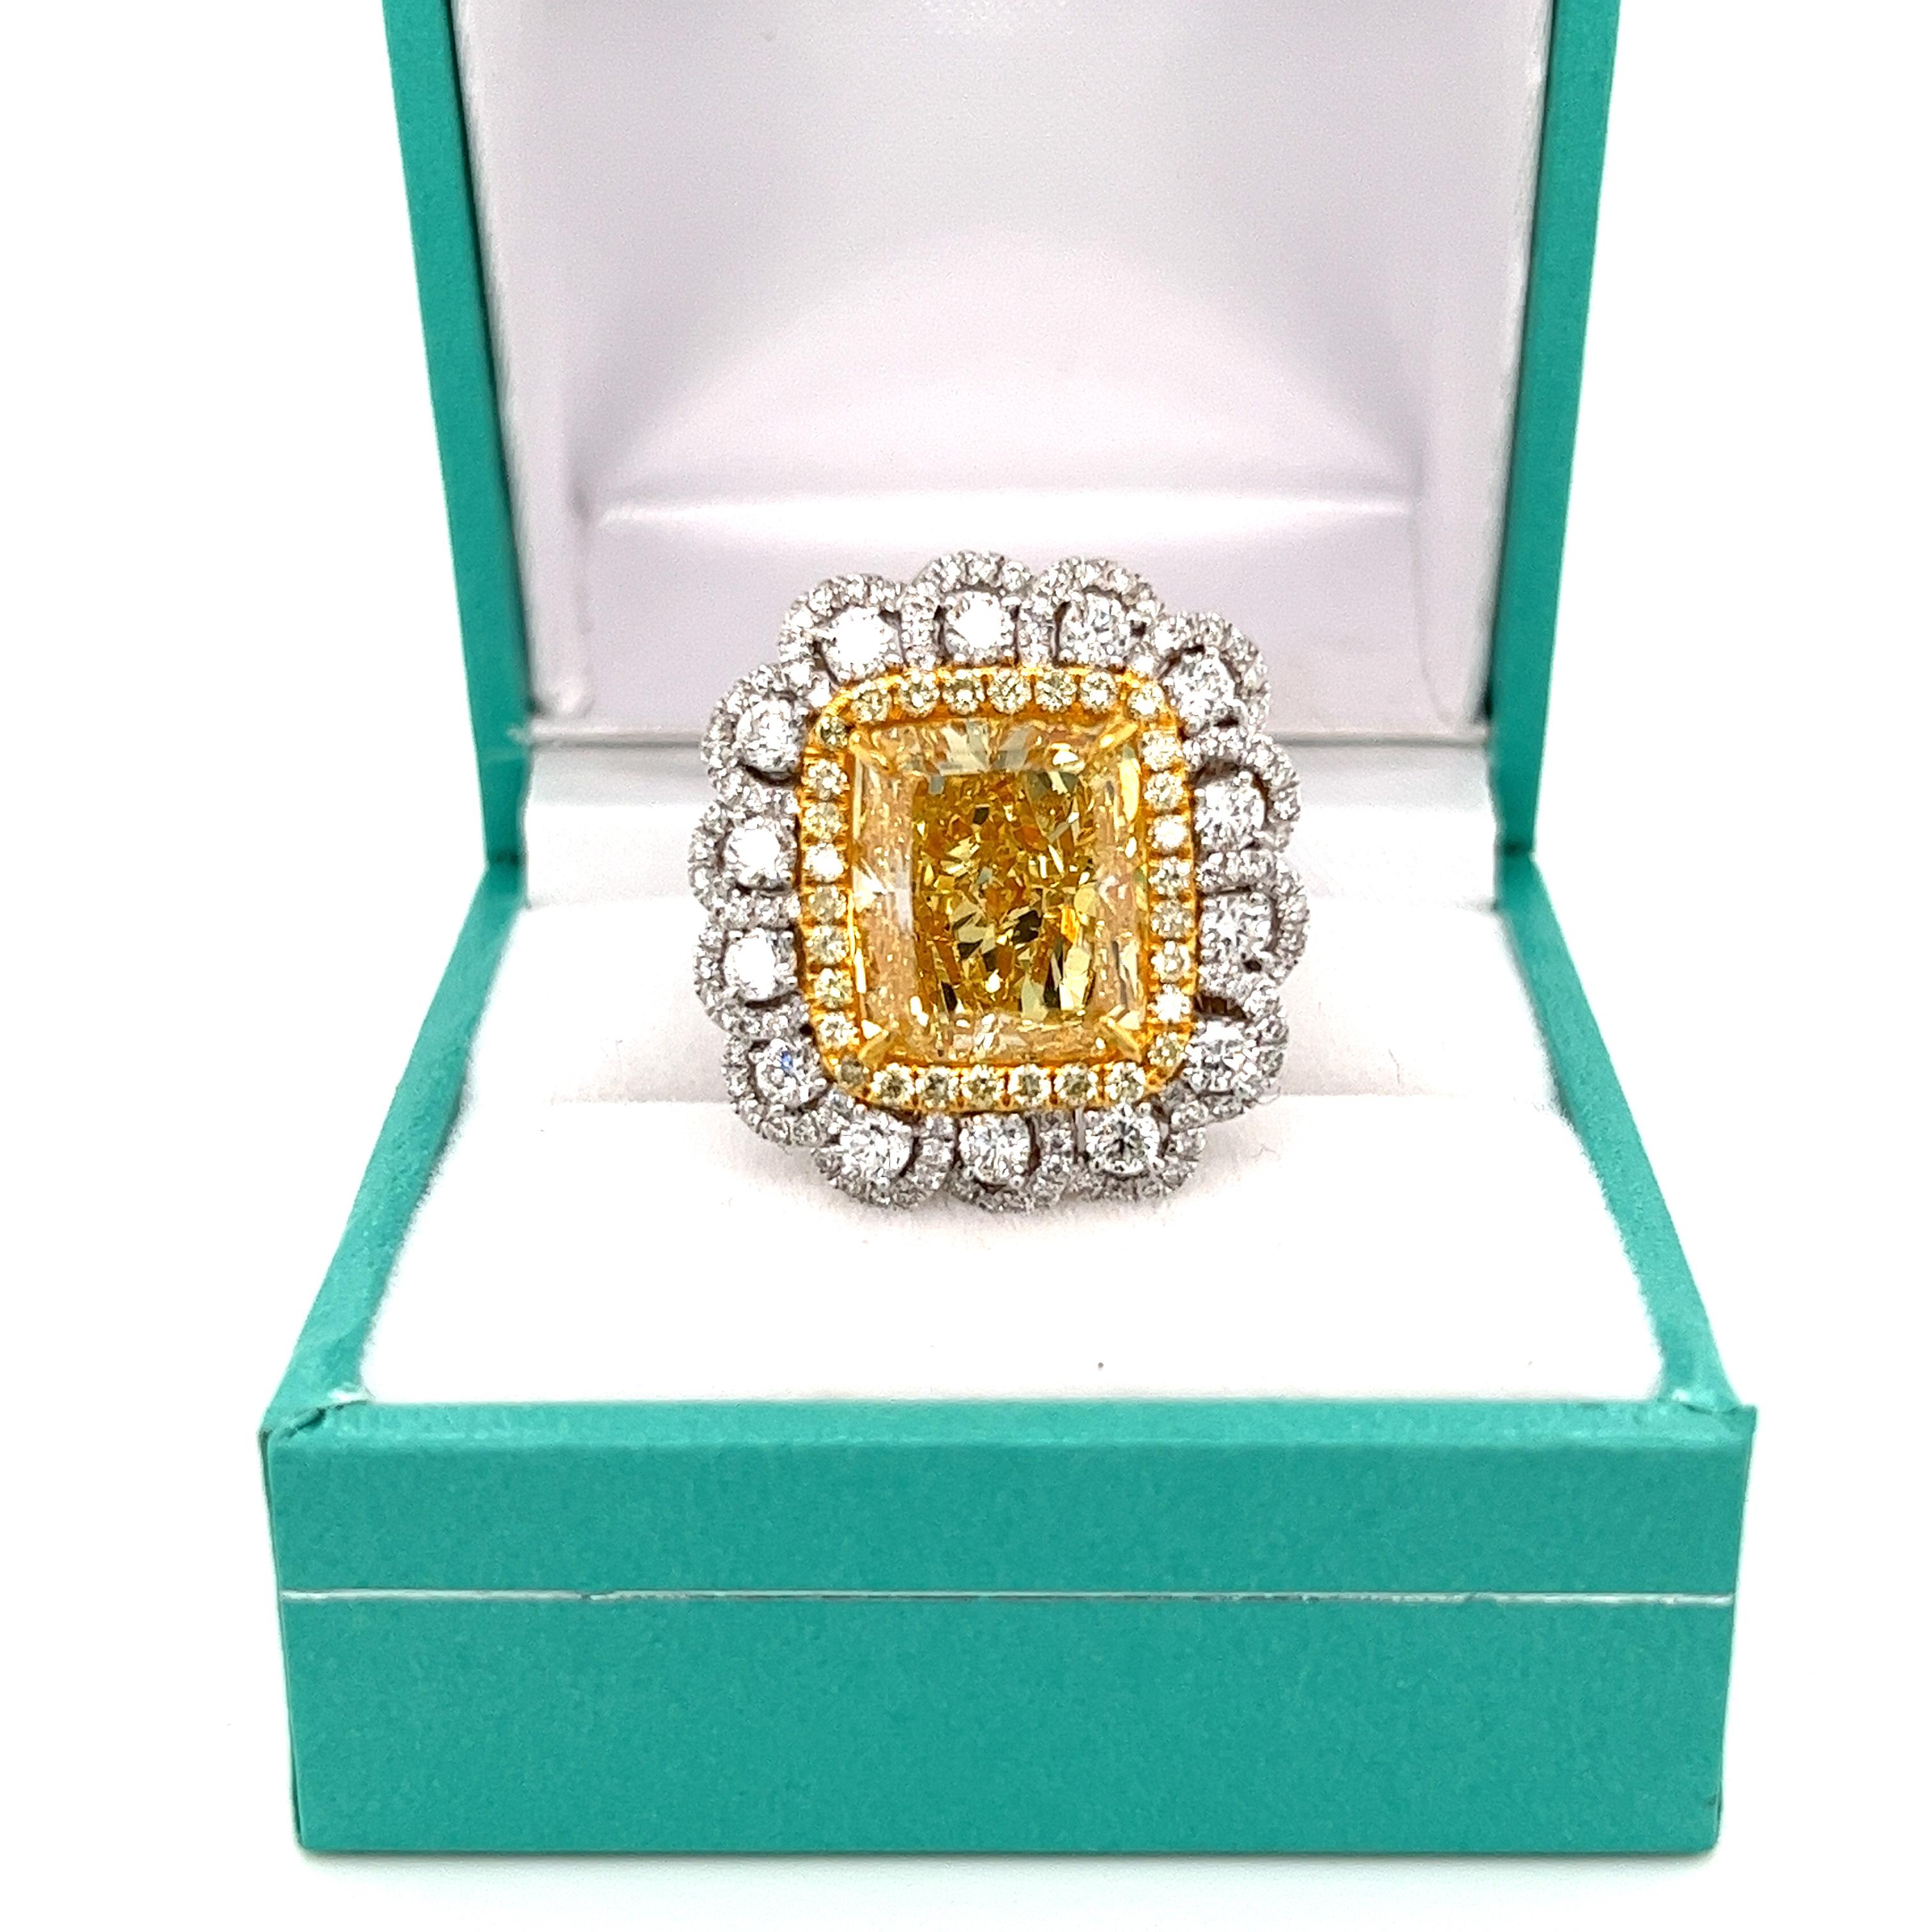 GIA Certified Fancy Intense Yellow 7 Carat Radiant Cut Diamond Ring in 18k Gold For Sale 1